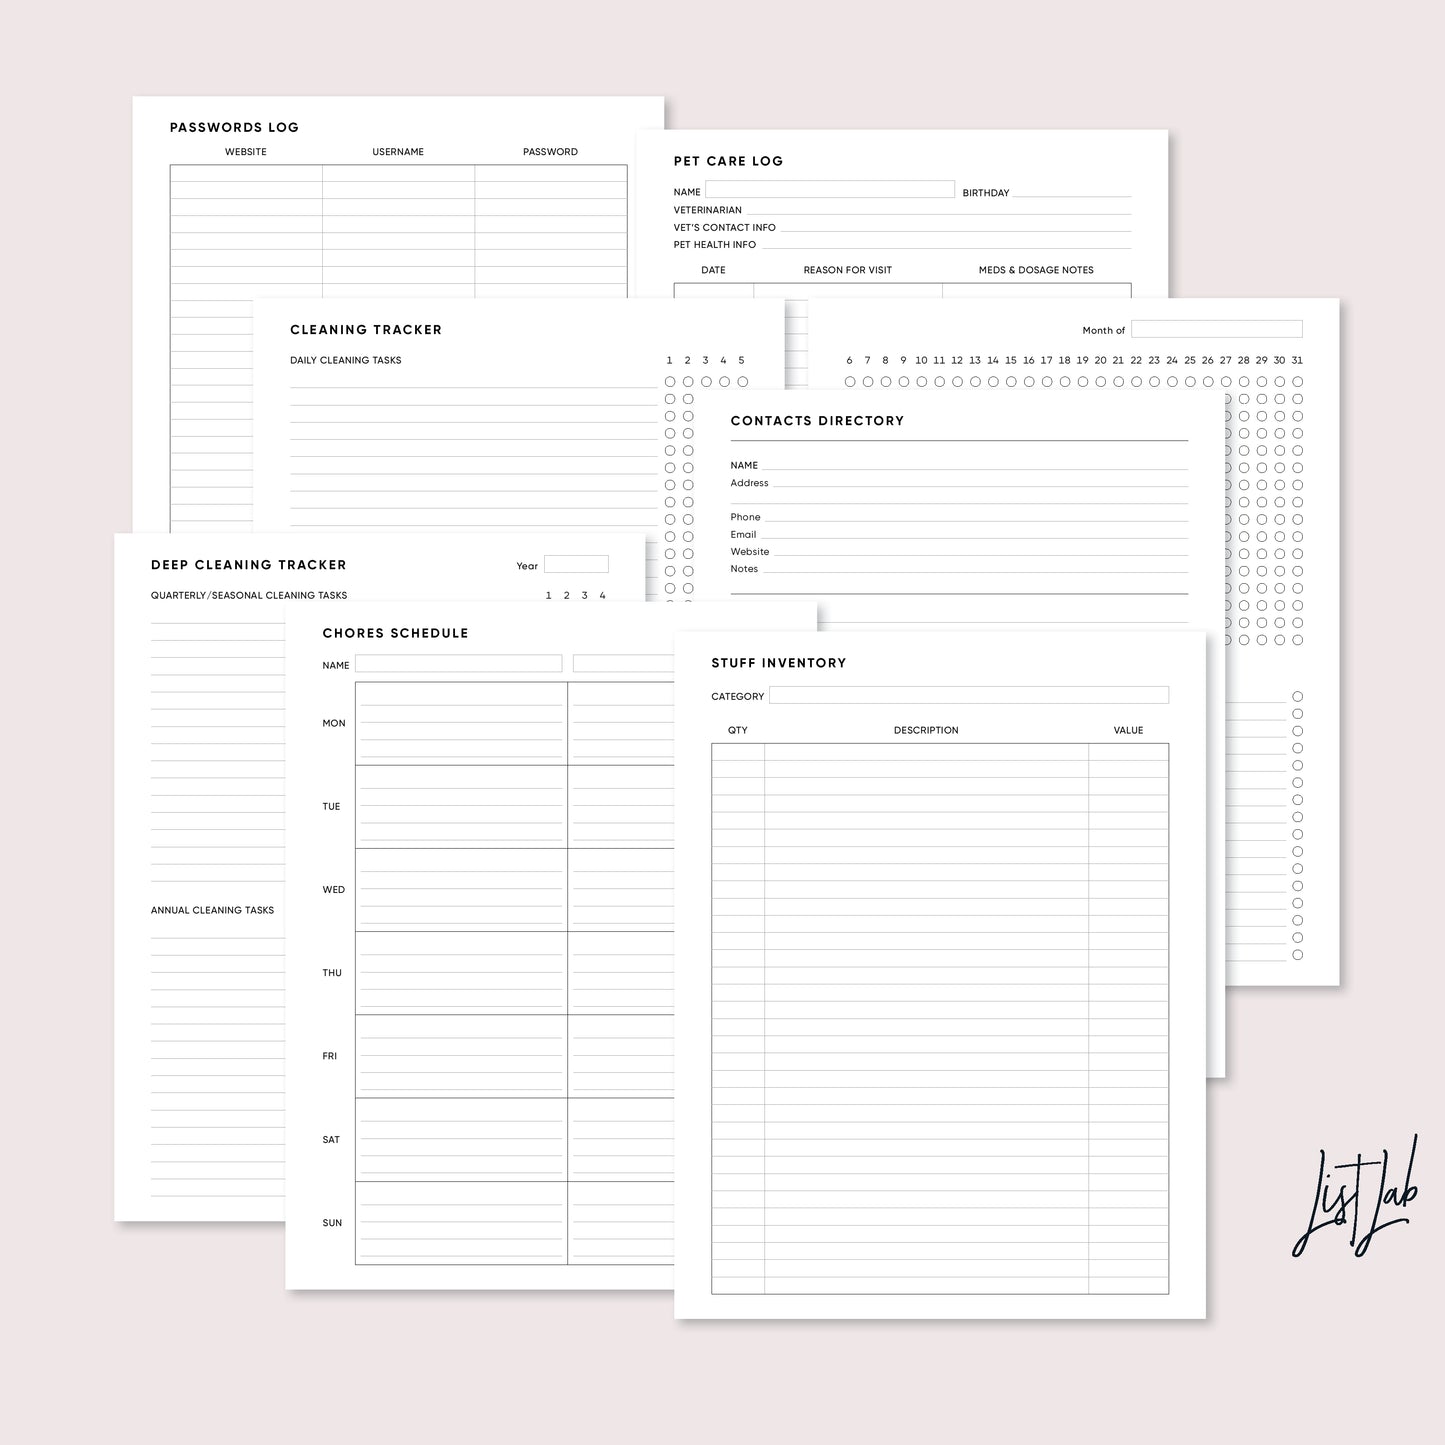 A4 and Letter Size  Ring / Discbound HOME MANAGEMENT Kit Printable Set